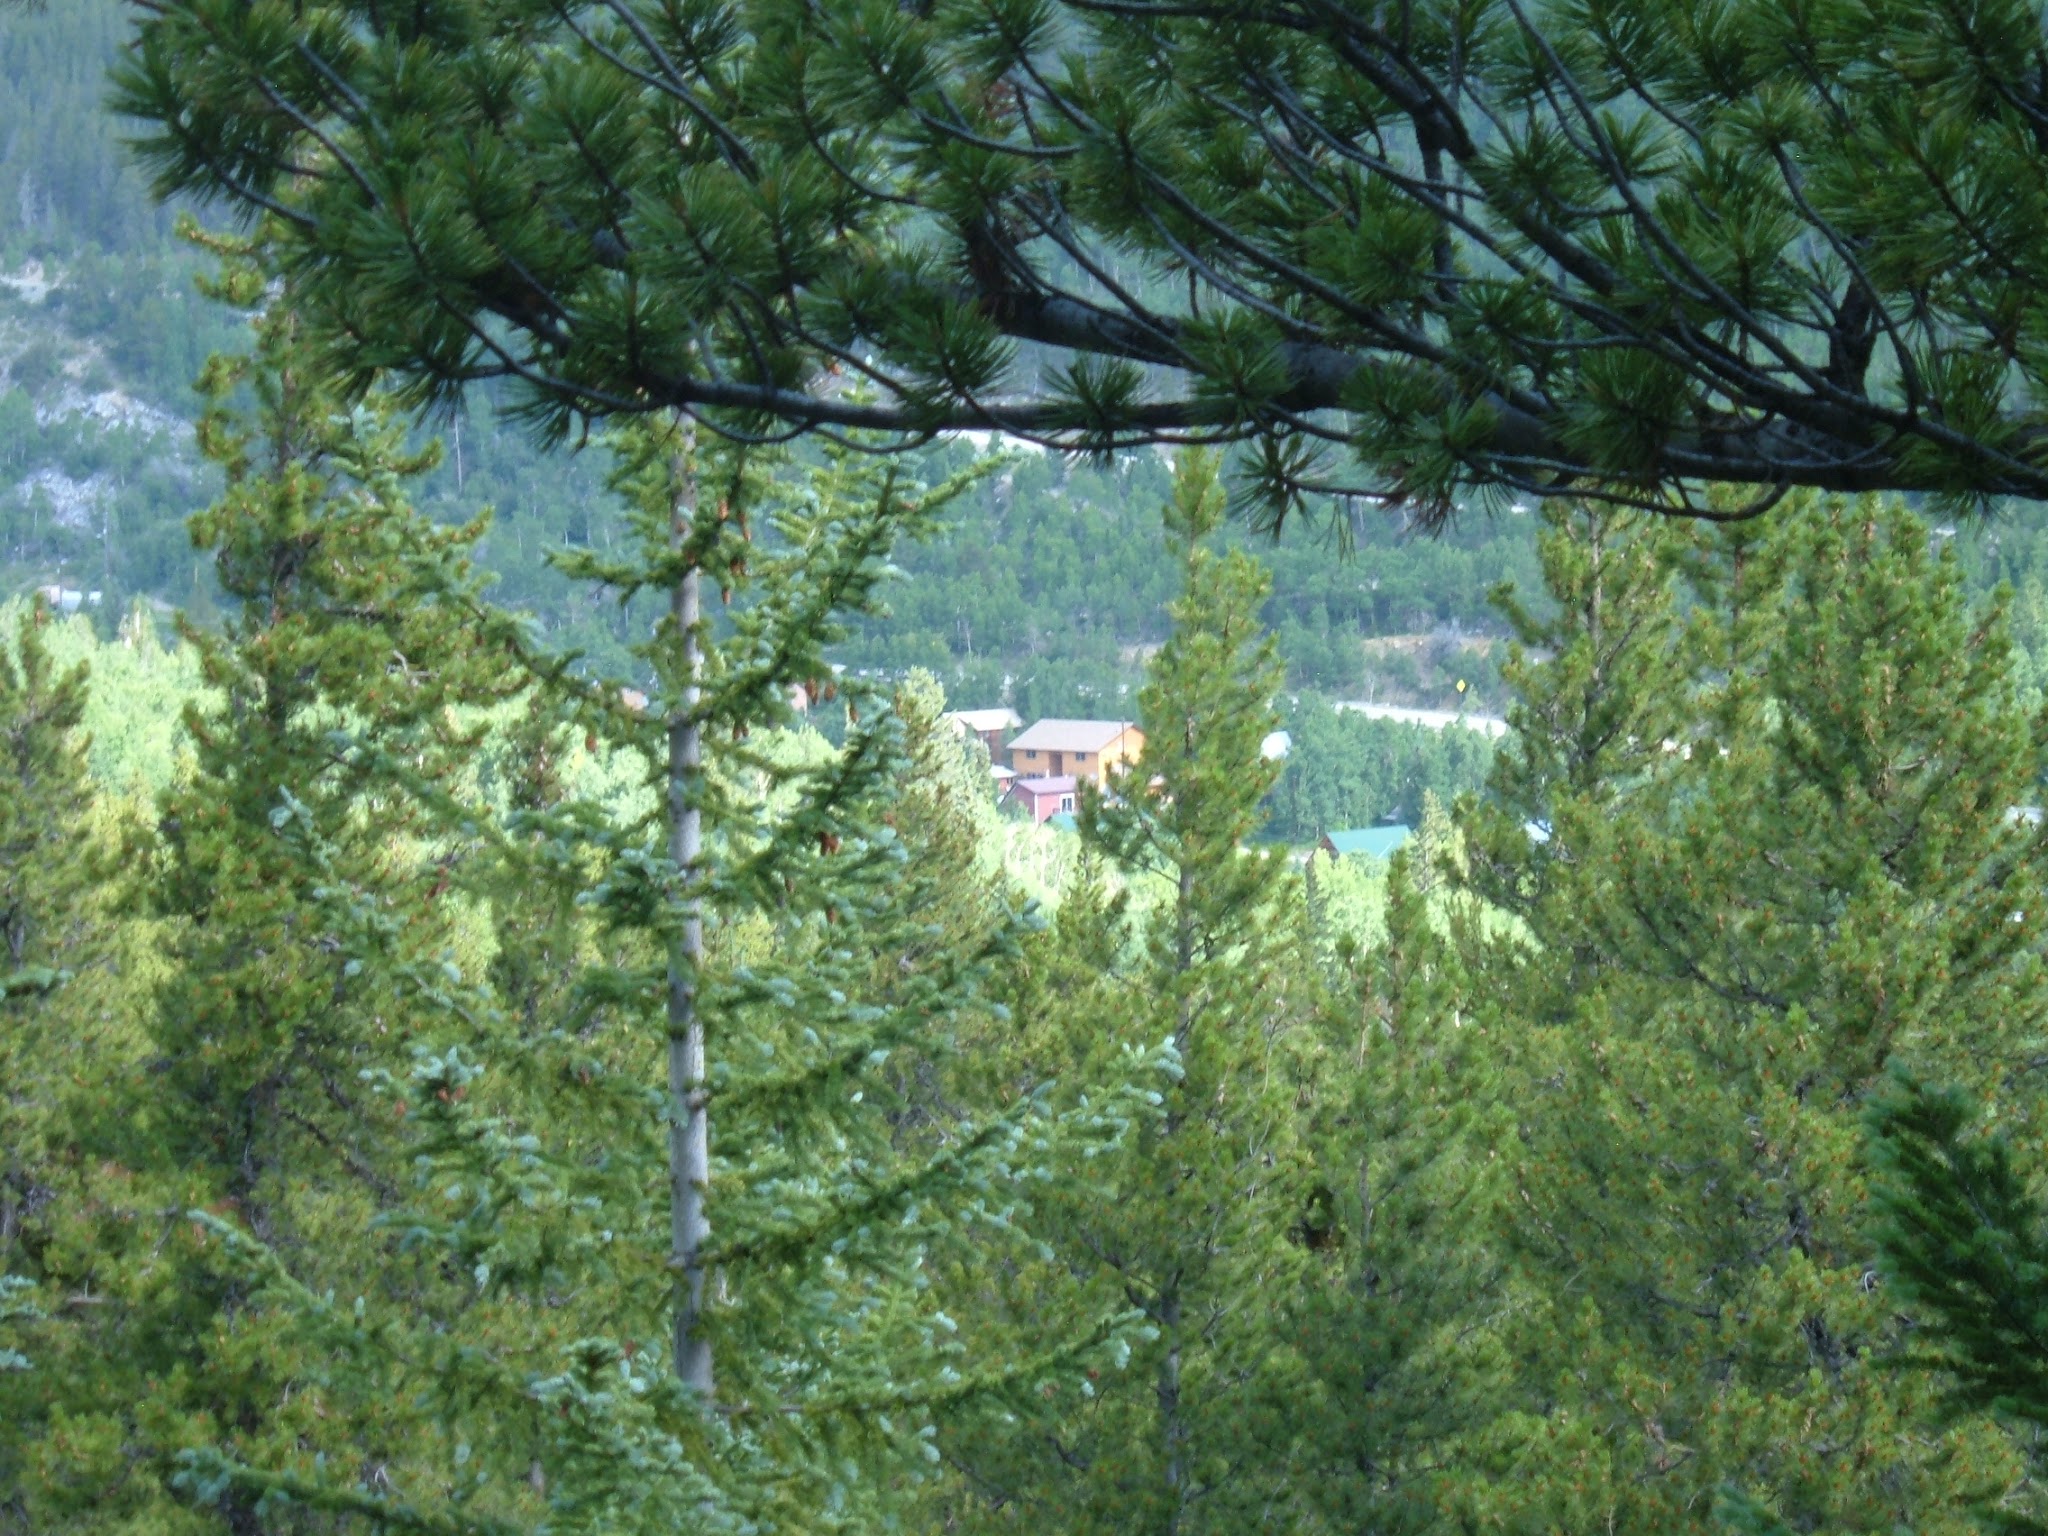 Looking through the pines at Ski Town Condos in the distance.